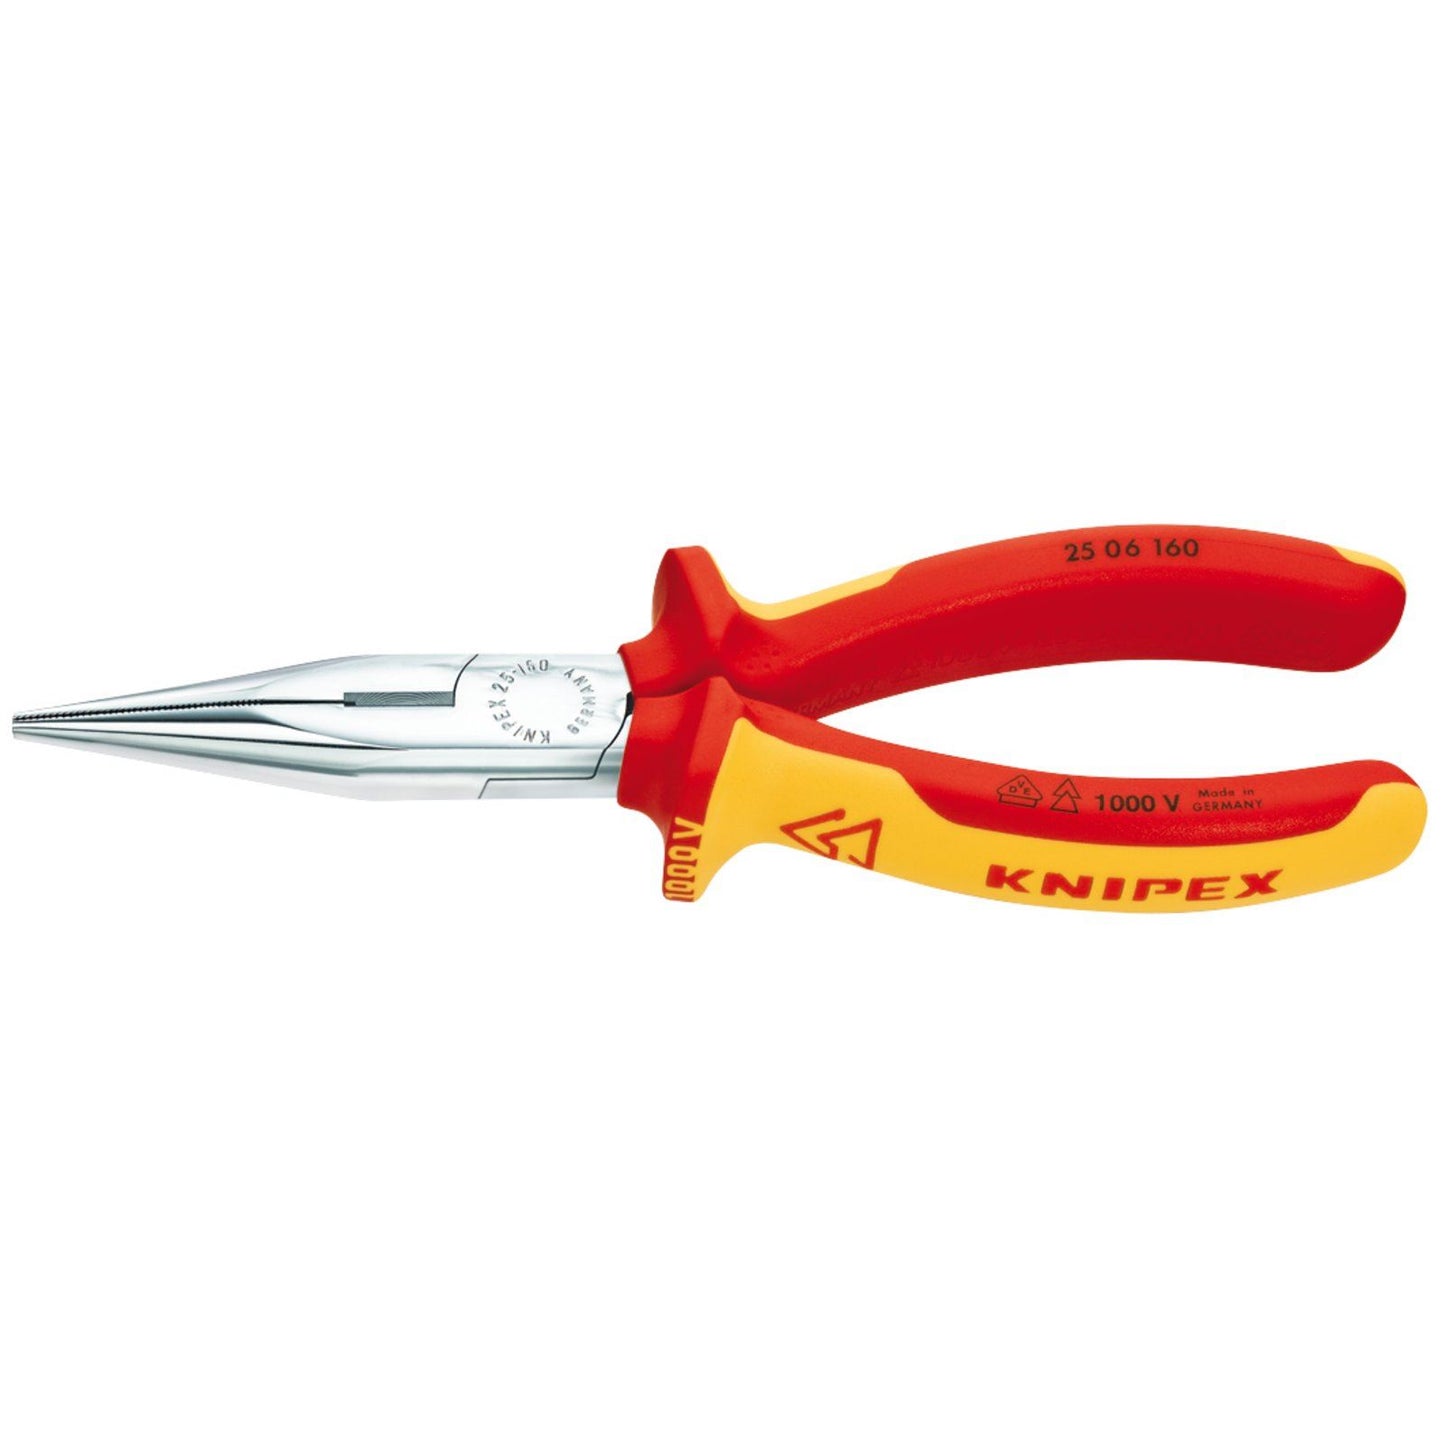 Knipex Knipex 25 06 160 SBE 160mm Fully Insulated Long Nose Pliers - 81238